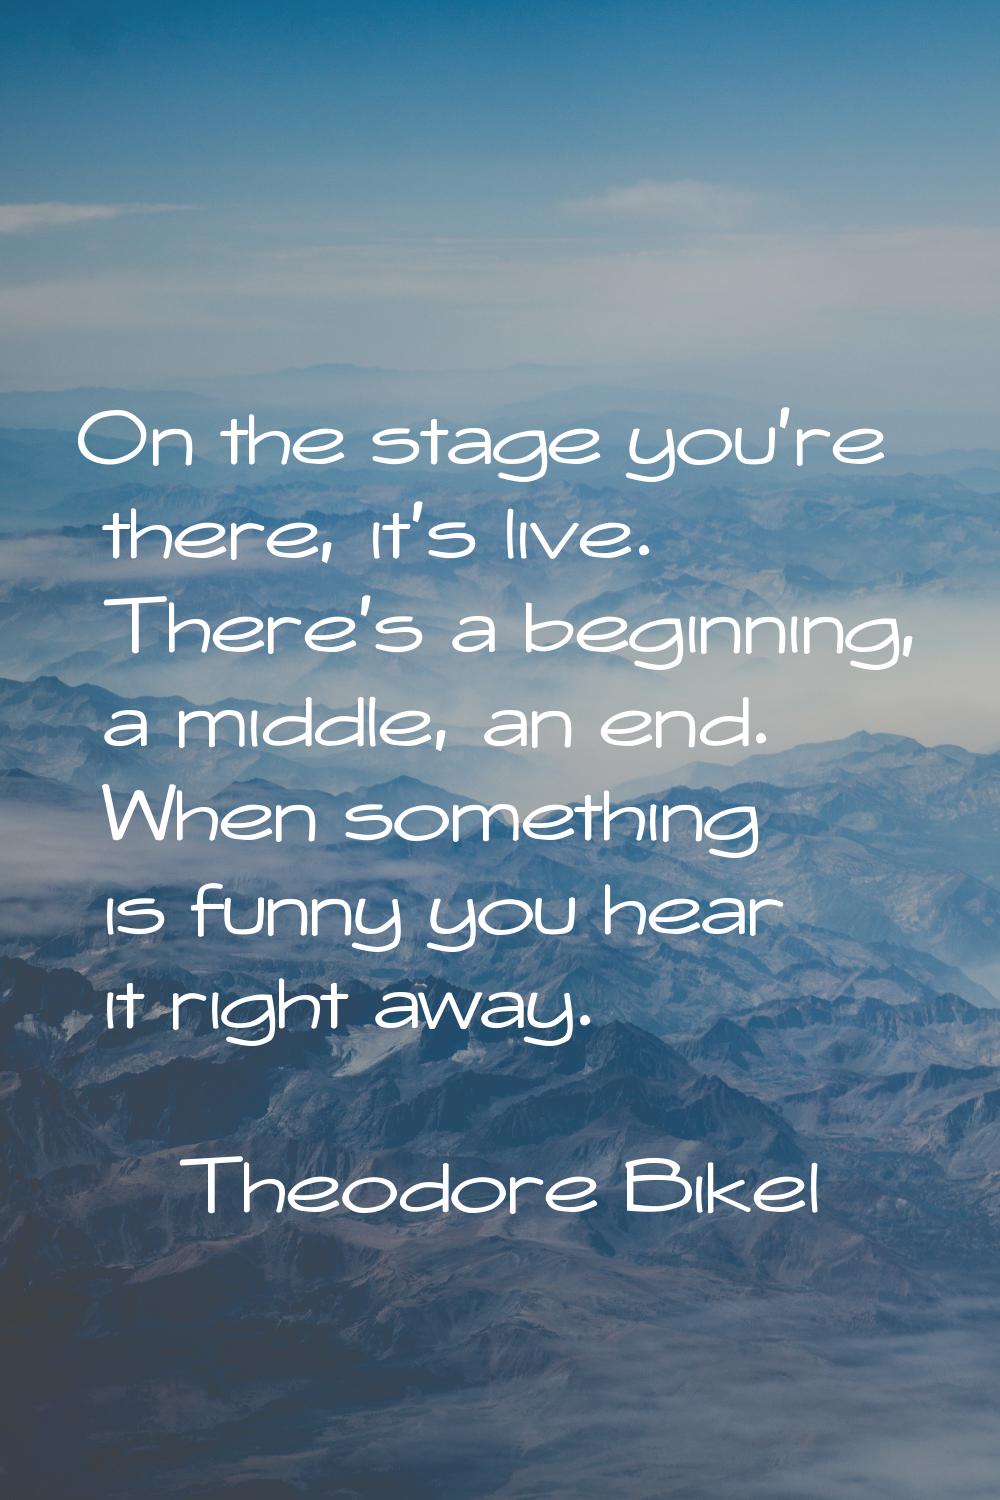 On the stage you're there, it's live. There's a beginning, a middle, an end. When something is funn